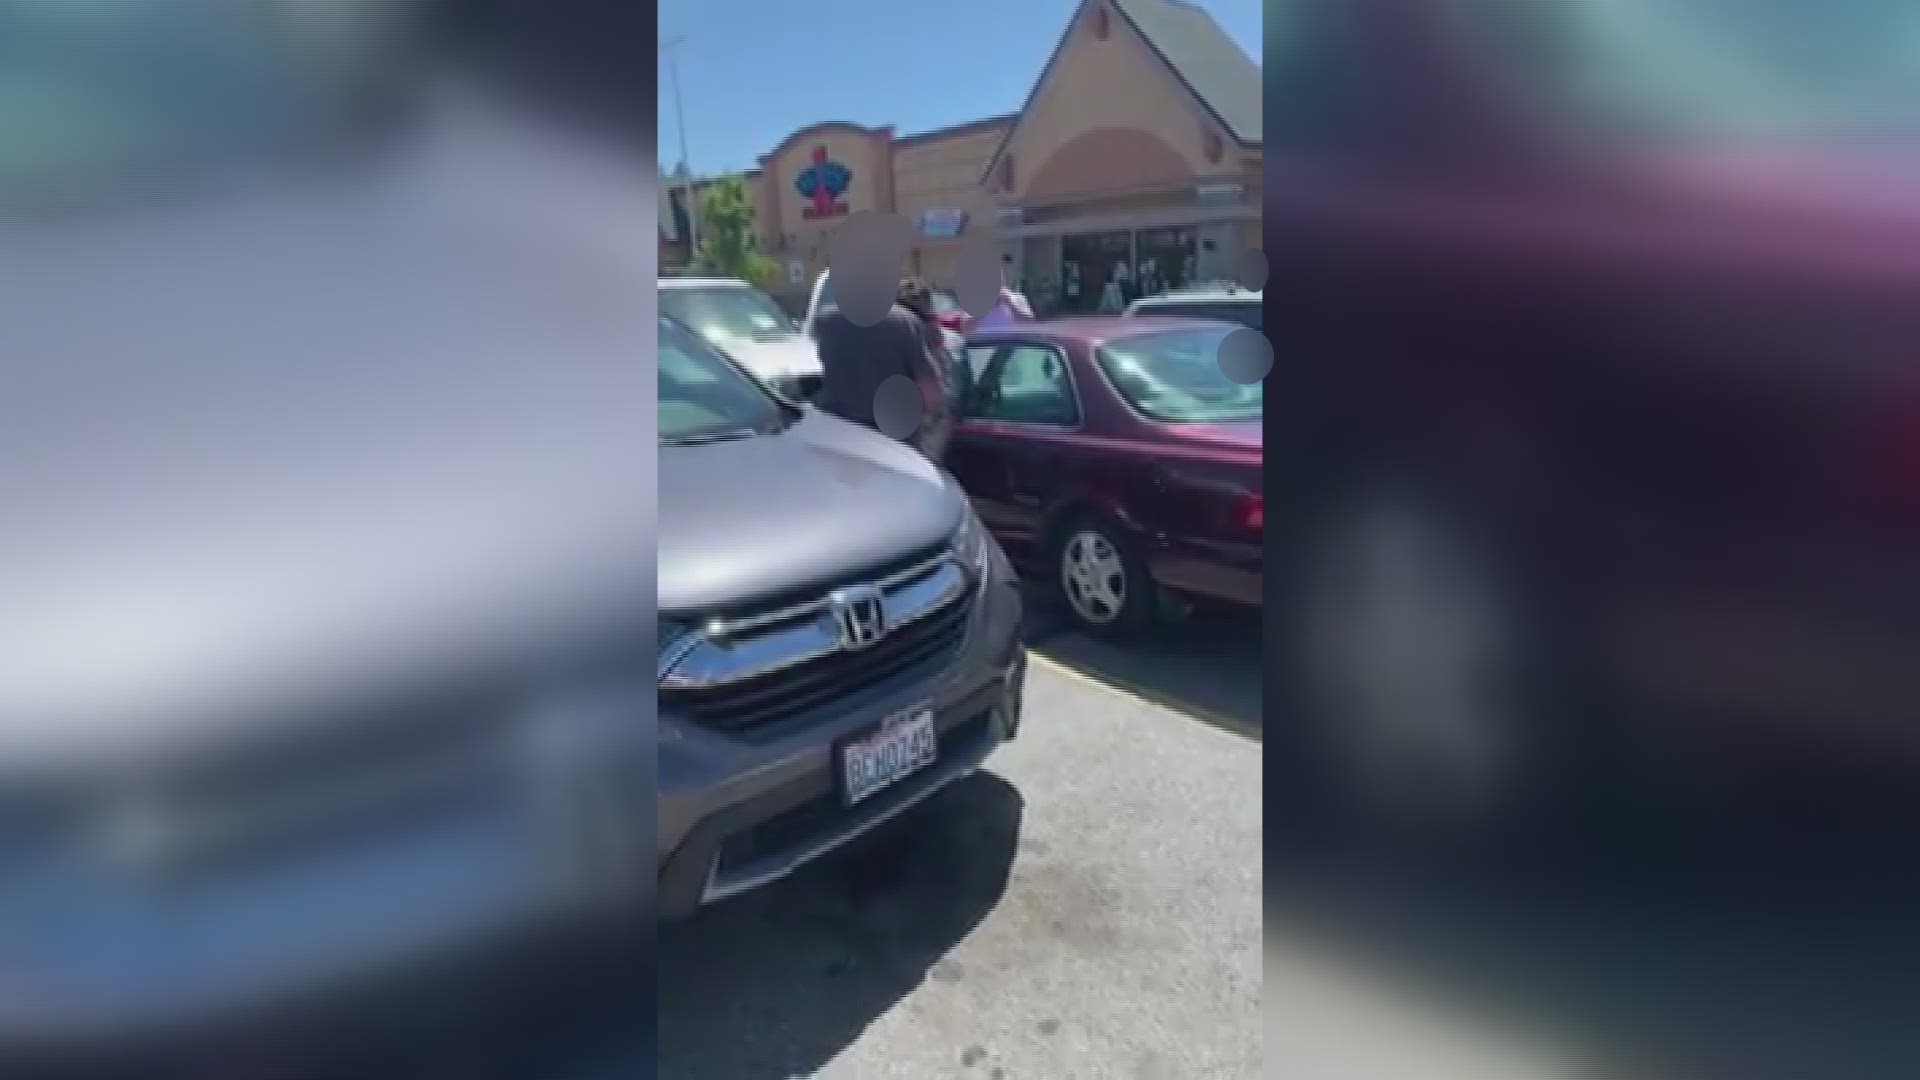 WARNING: This video contains profanity. It shows two people in a parking lot on Spokane's South Hill who are apparently holding a woman at gunpoint.